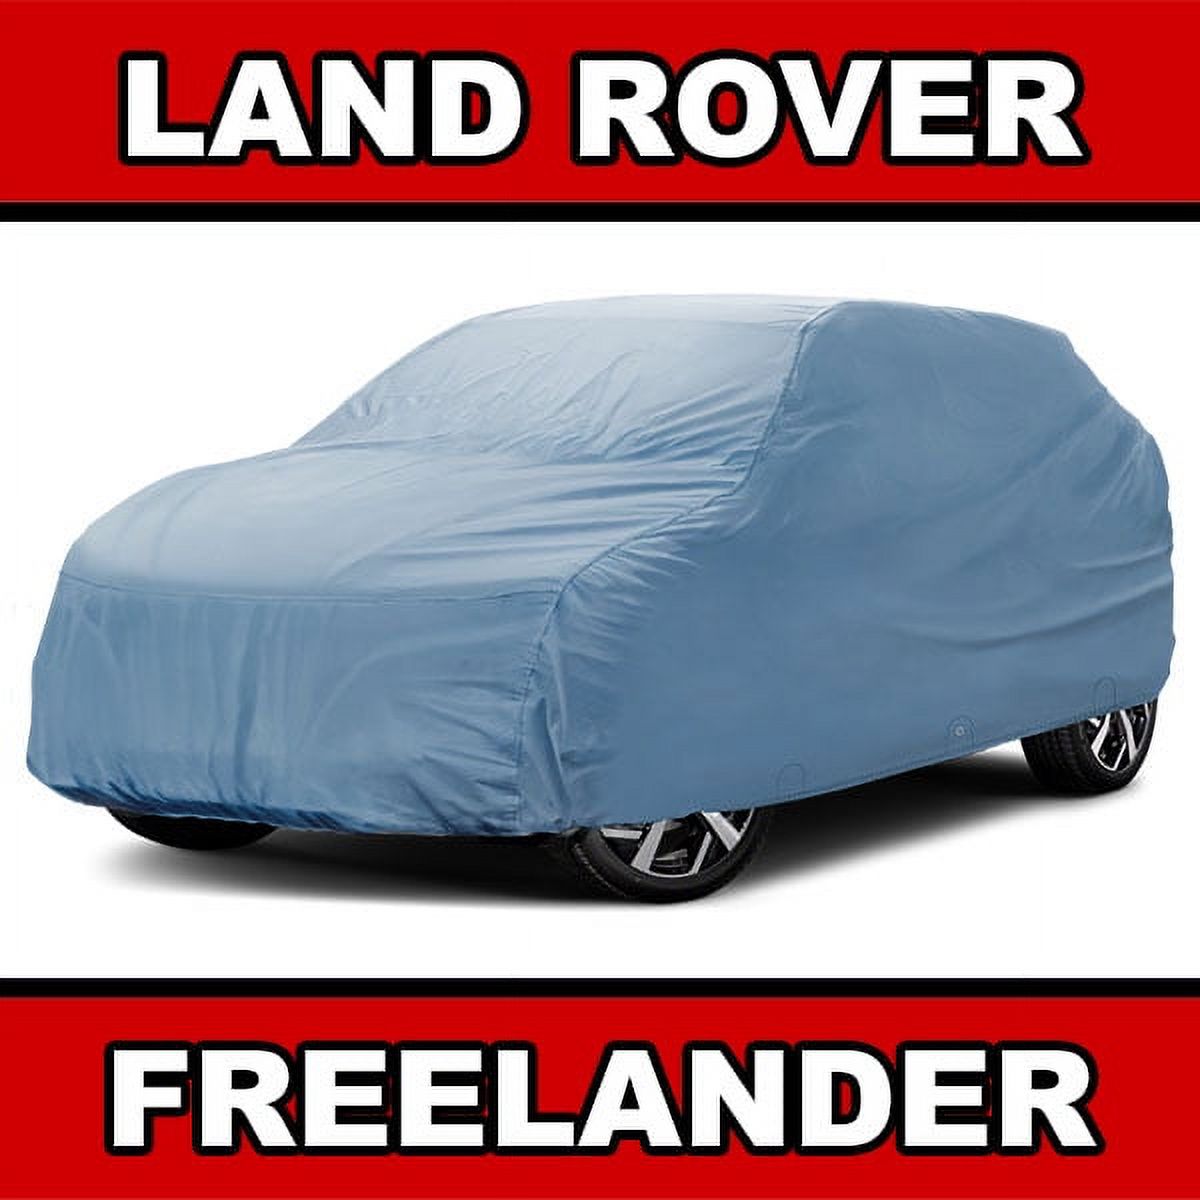 iCarCover Fits [Land Rover Freelander 2-Door] 1997 1998 1999 2000 2001 2002 2003 2004 2005 2006 For Automobiles Waterproof Full Exterior Snow Indoor Outdoor Protection Heavy Duty Custom SUV Car Cover - image 1 of 3